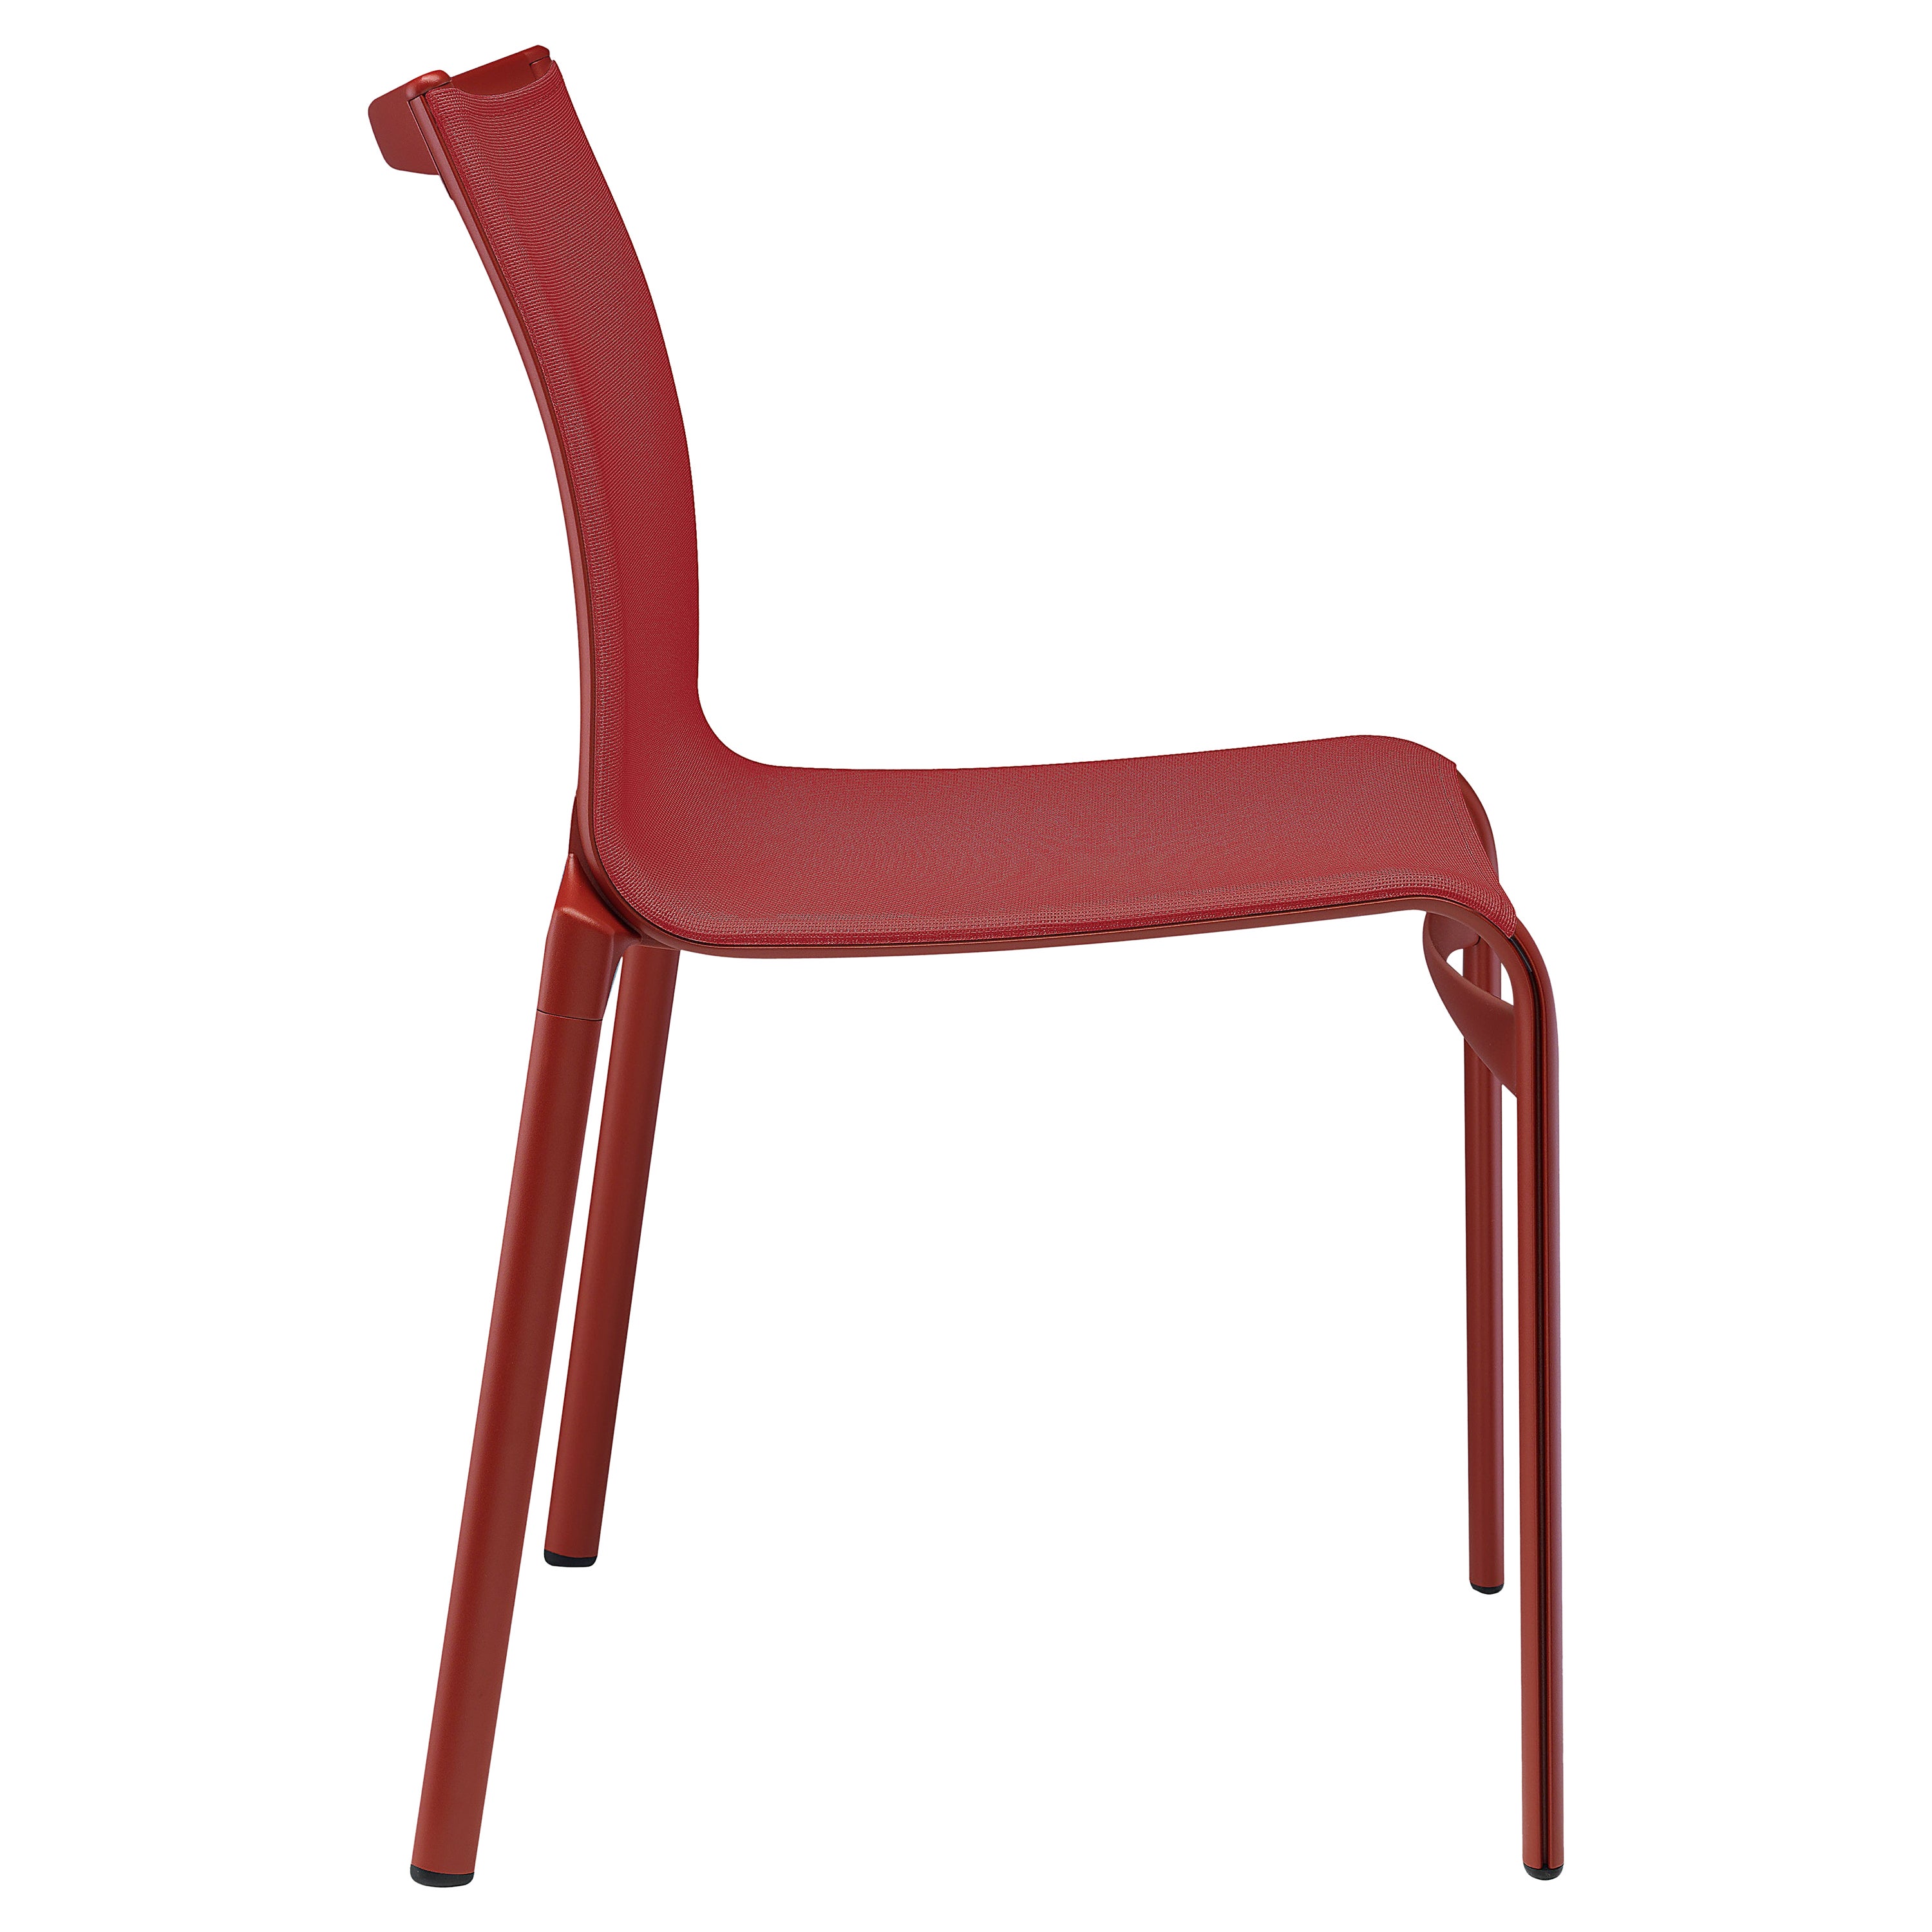 Alias Bigframe 44 Outdoor Chair in Coral Red Mesh with Lacquered Aluminium Frame For Sale